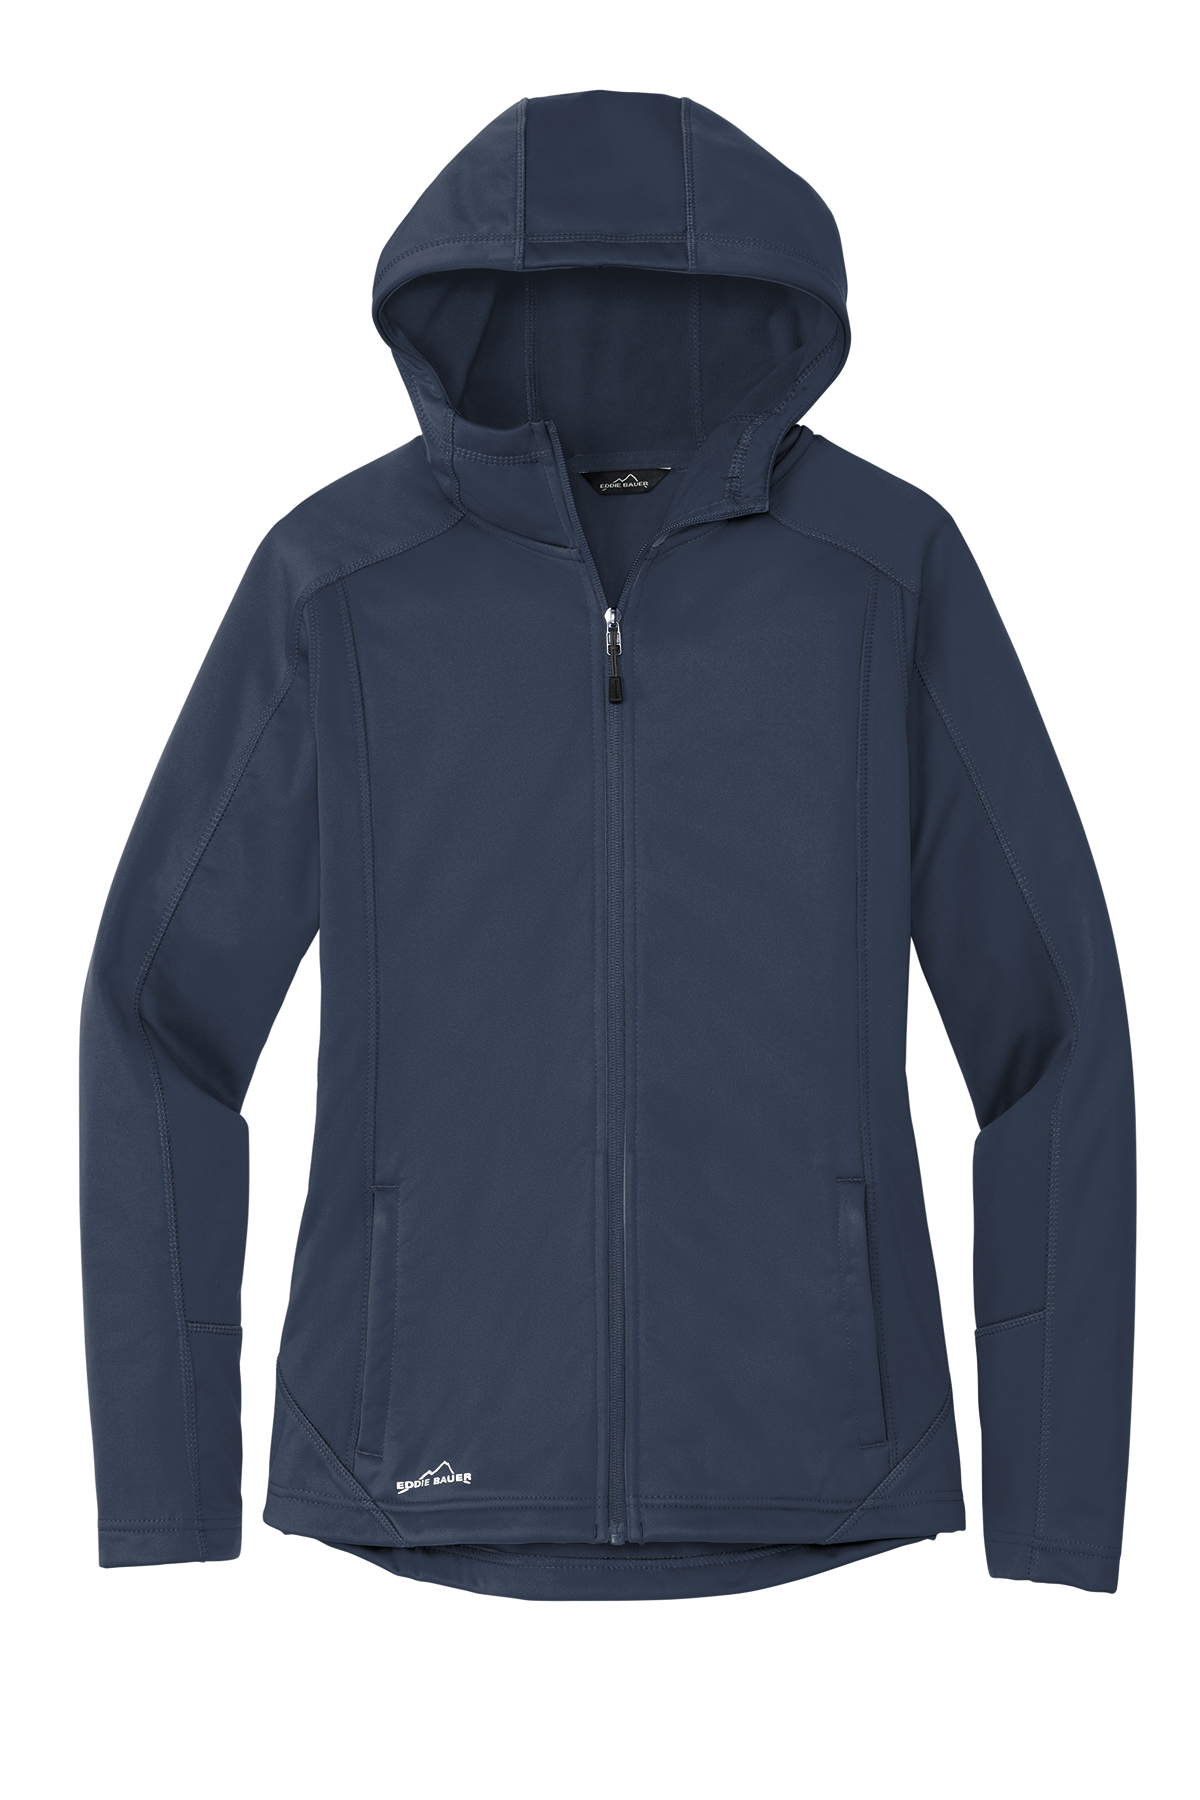 Shell Trail | Eddie Product Casuals Company Soft Bauer Ladies Jacket |